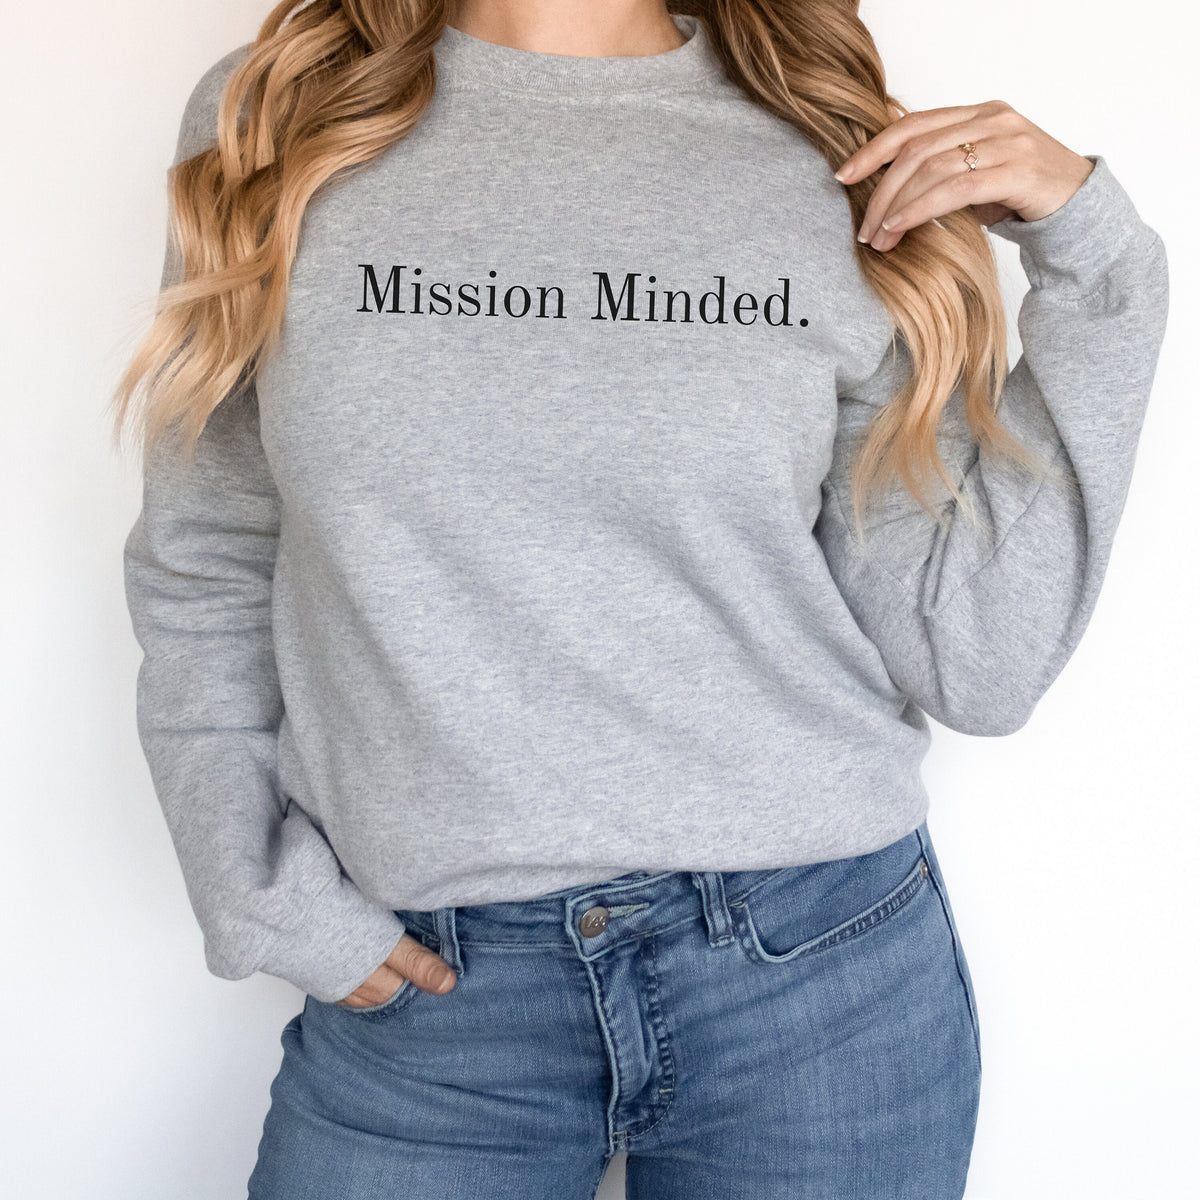 Christian Sweatshirt Woman Custom Christian Gifts for Women Faith Gifts for Her Friend Gift for Woman Jesus Crewneck Gift for Pastor Wife